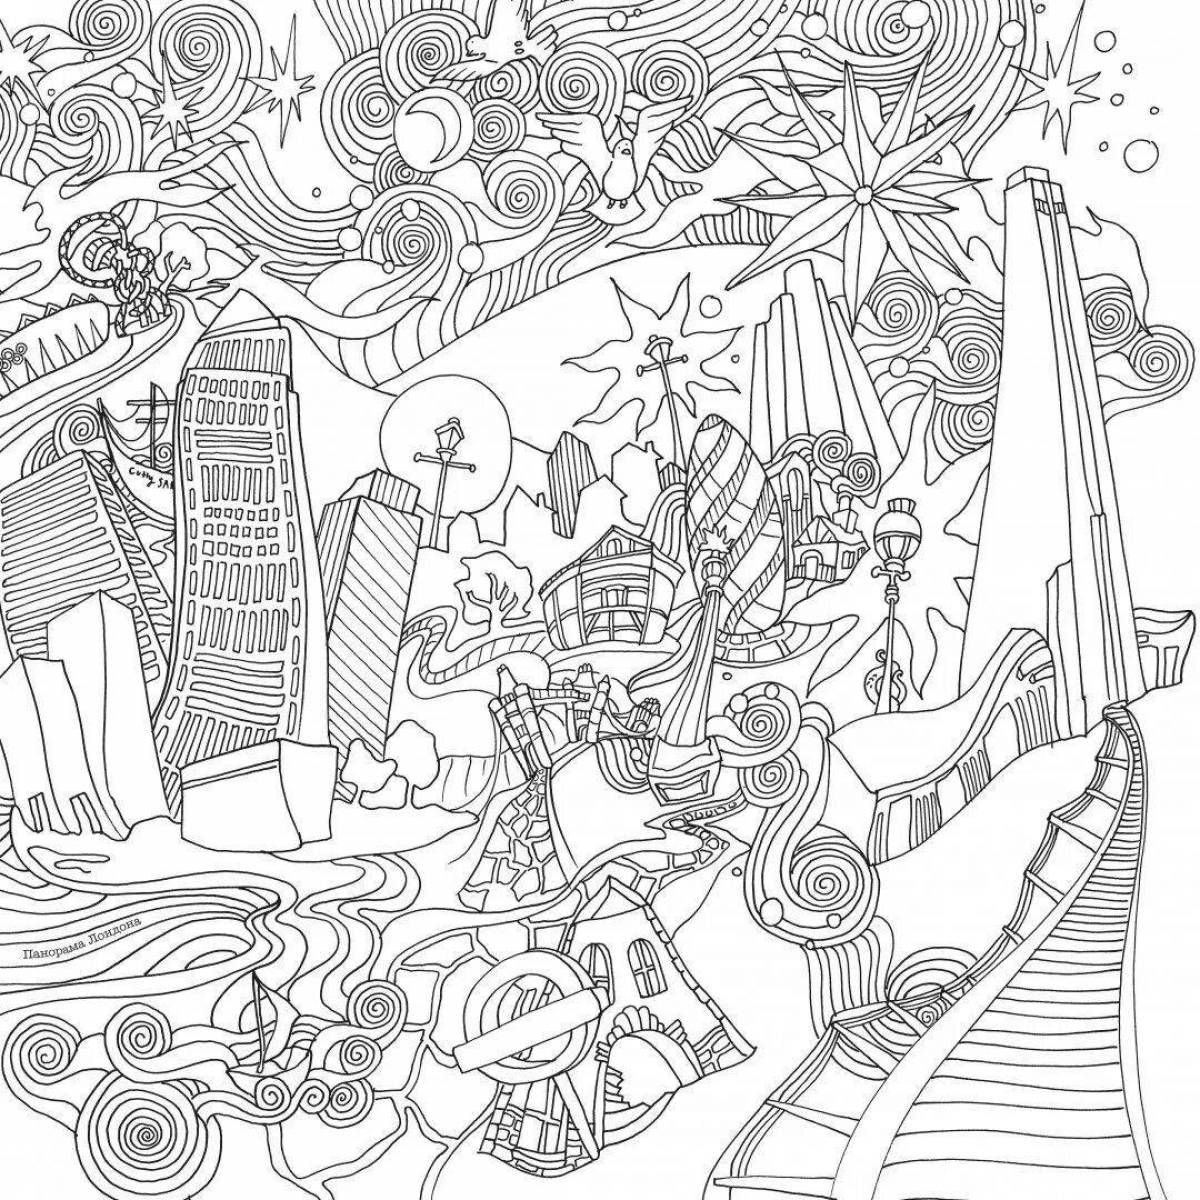 Amazing coloring book relax magical cities of the world